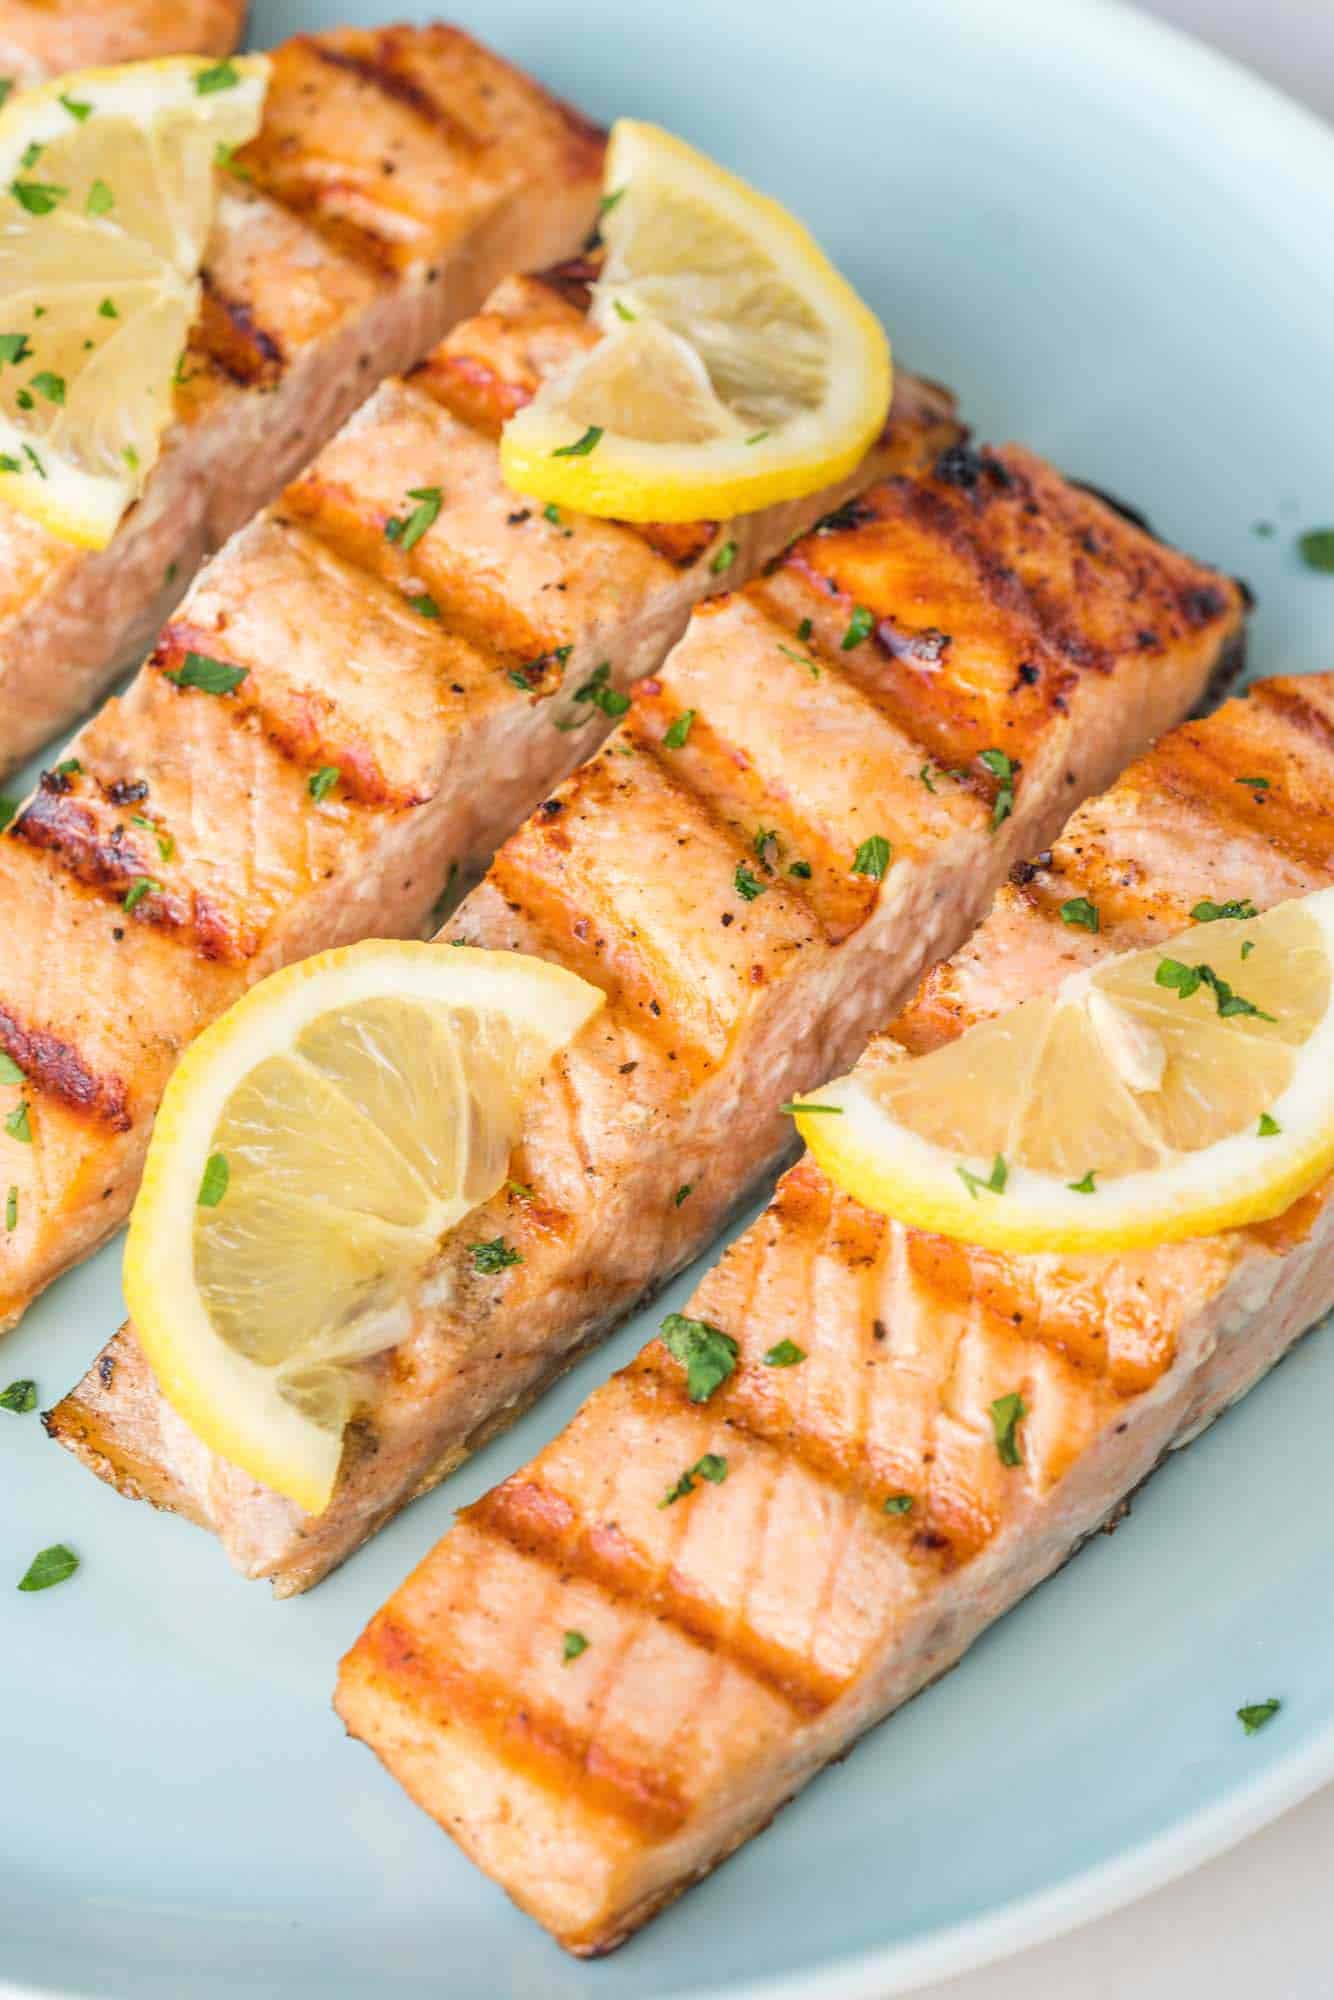 Salmon filets with pronounced grill marks, topped with lemon slices, and resting on a light blue plate. 